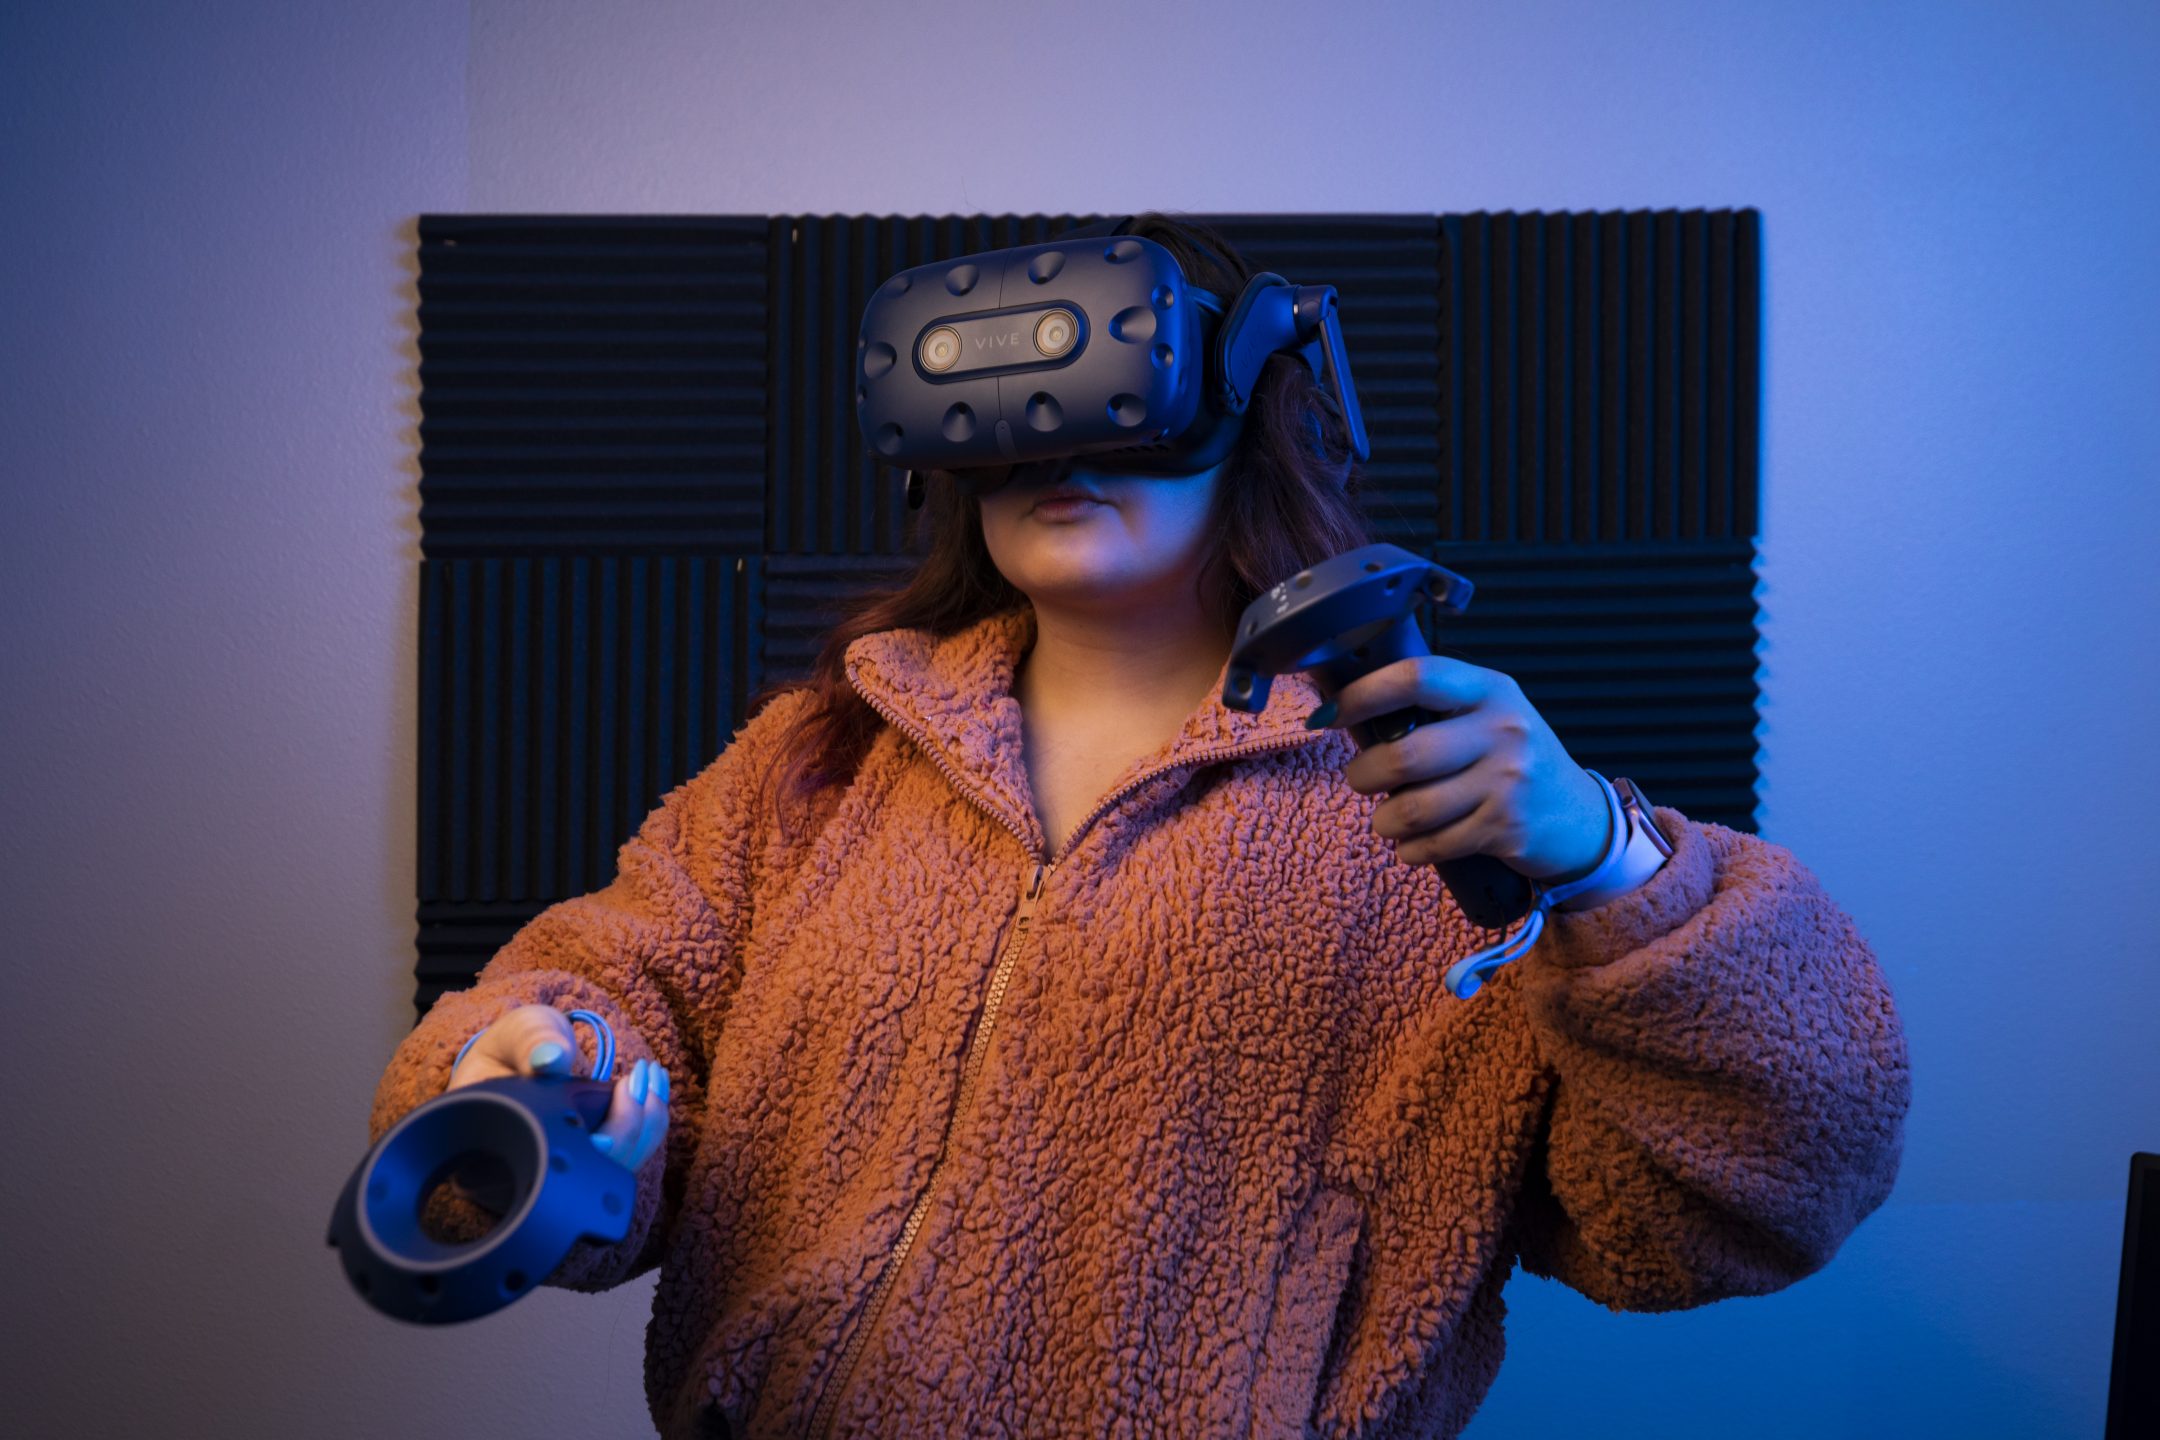 A young woman in an orange sweater and a VR visor handles a set of VR controls.